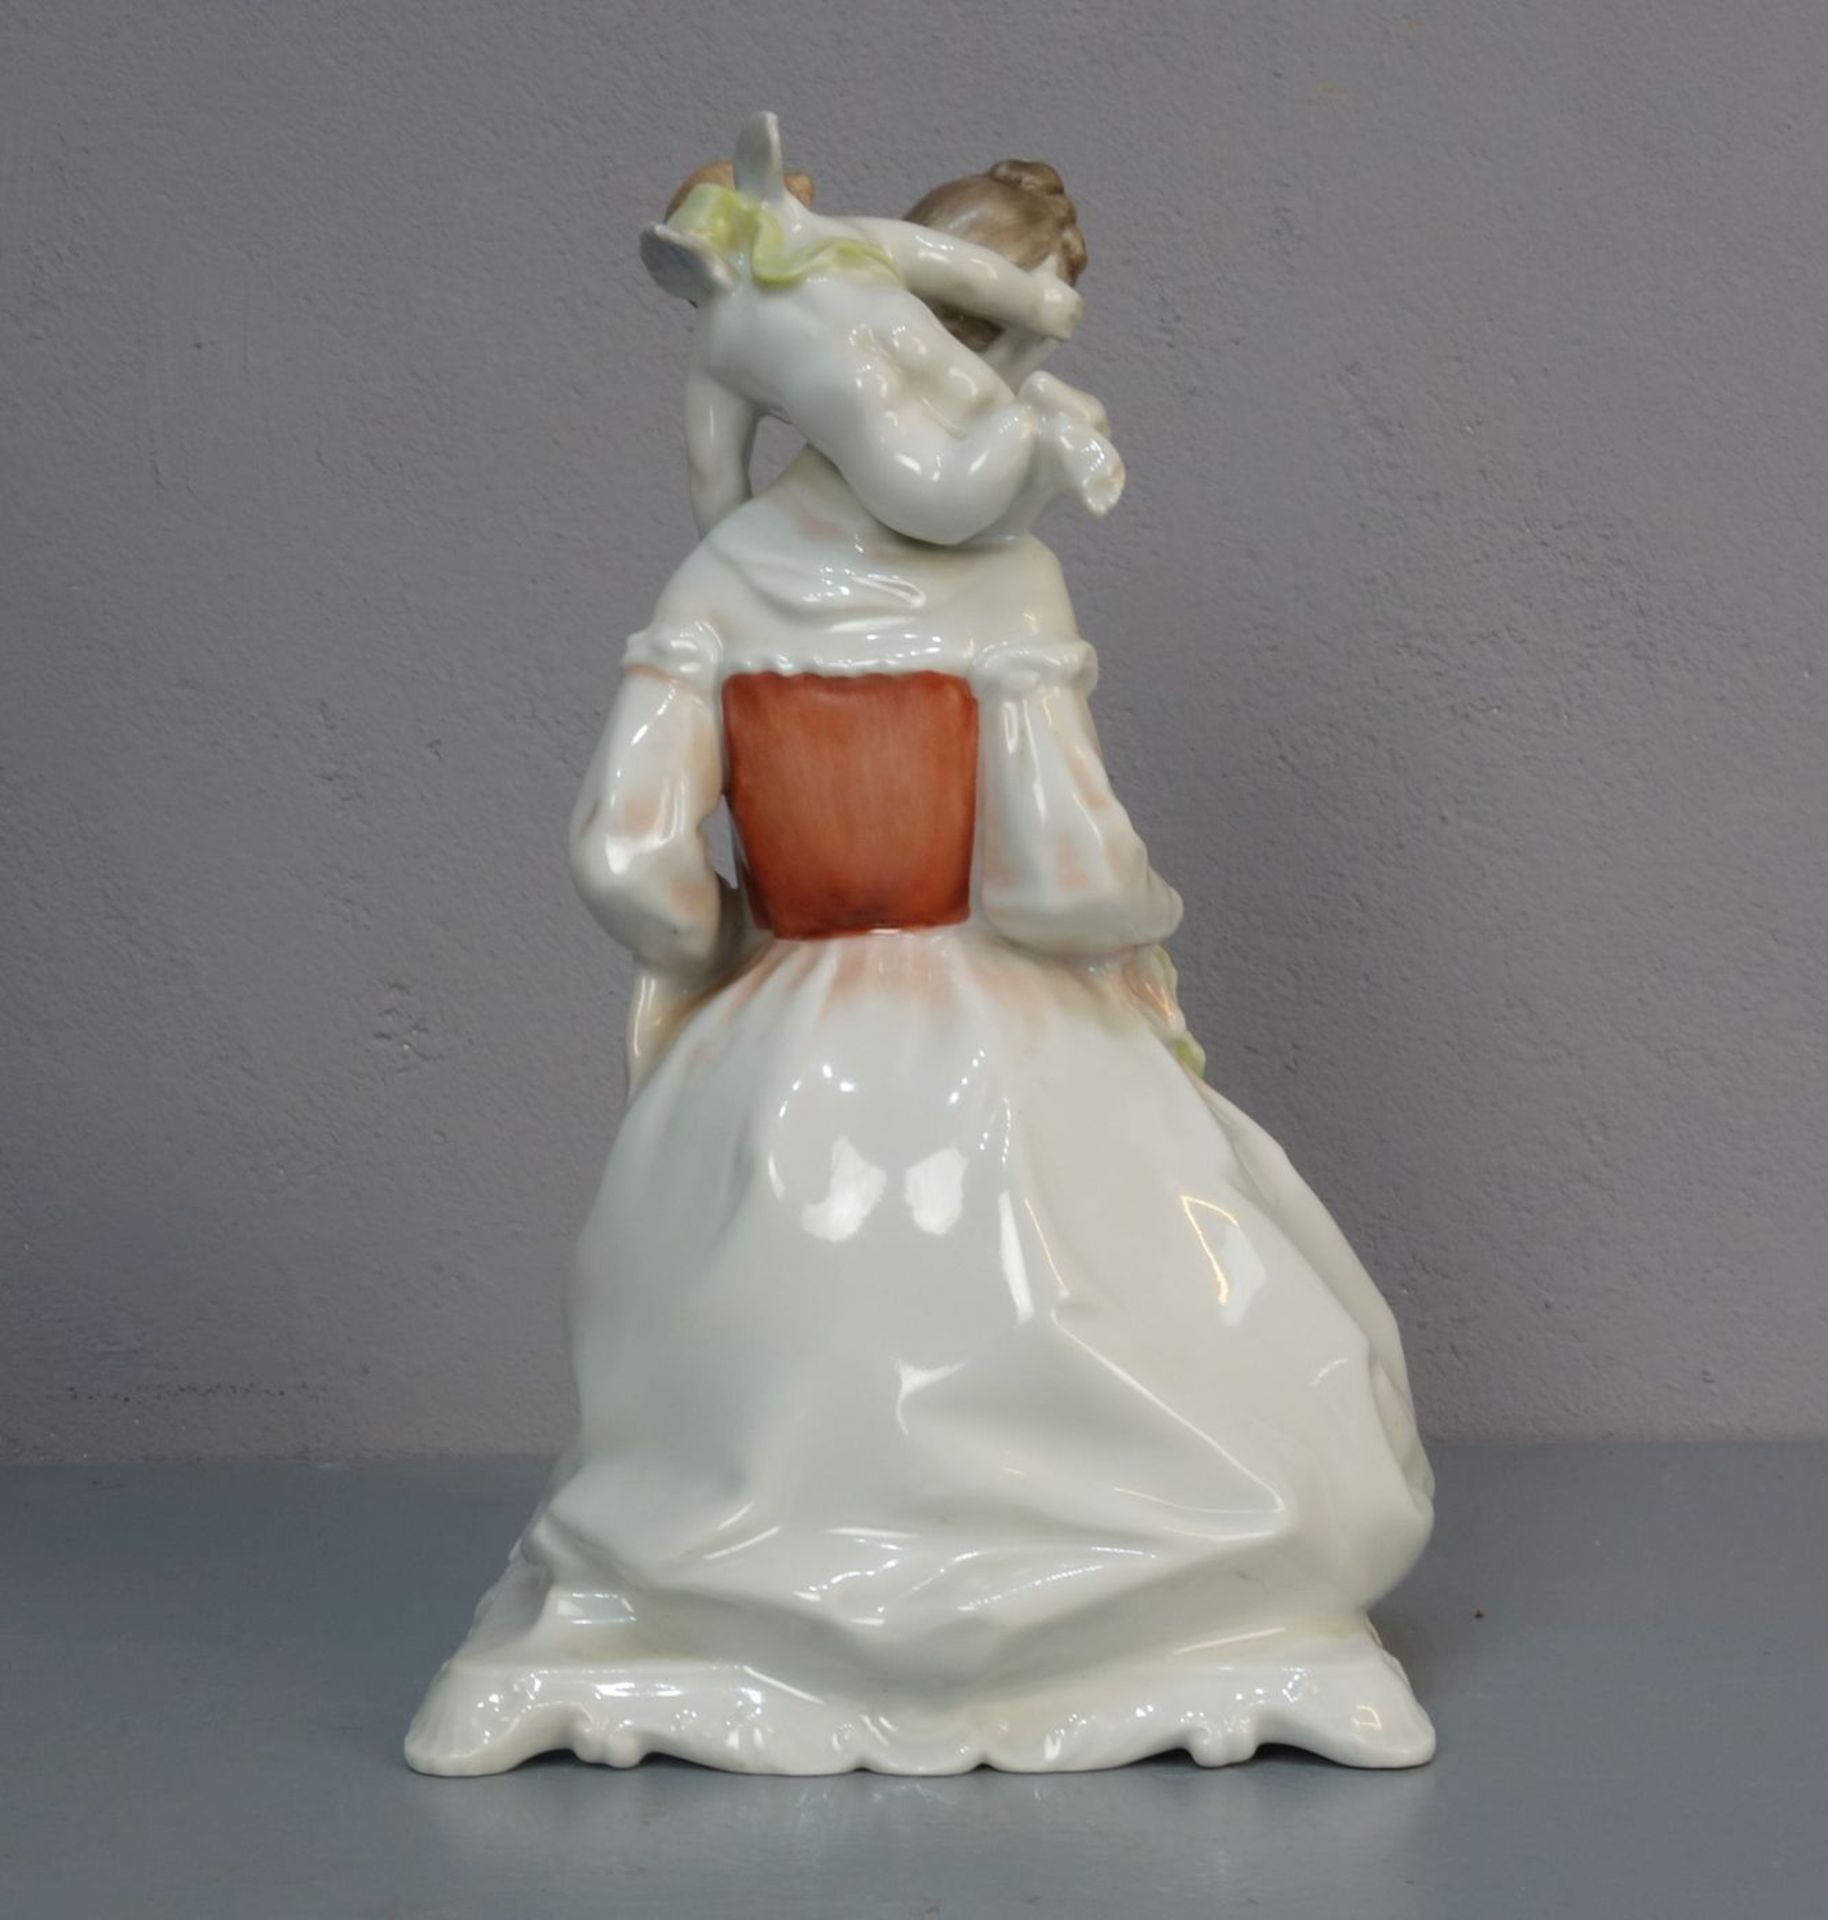 FIGURENGRUPPE "Frau mit Blumenstrauß und Amorette" / porcelain figure: "Woman with flowers and - Image 3 of 5